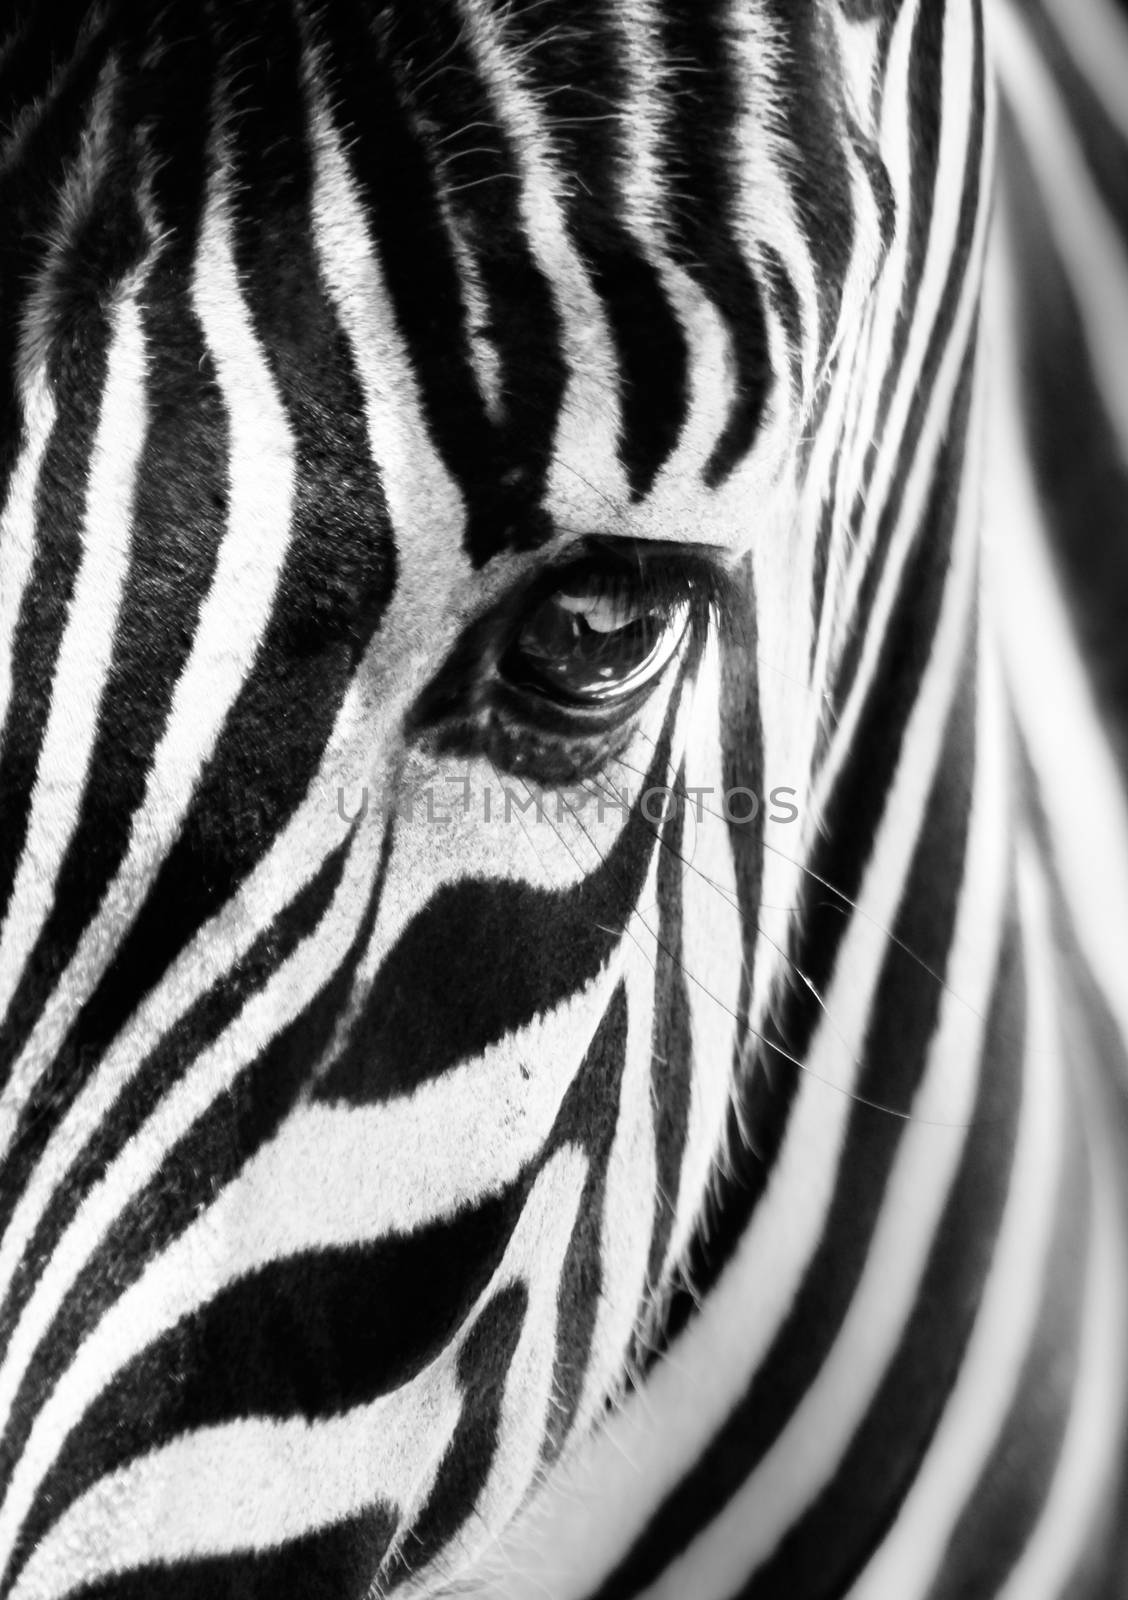 Artistic closeup portrait of a zebra. Graphical pattern. Black and white photo.